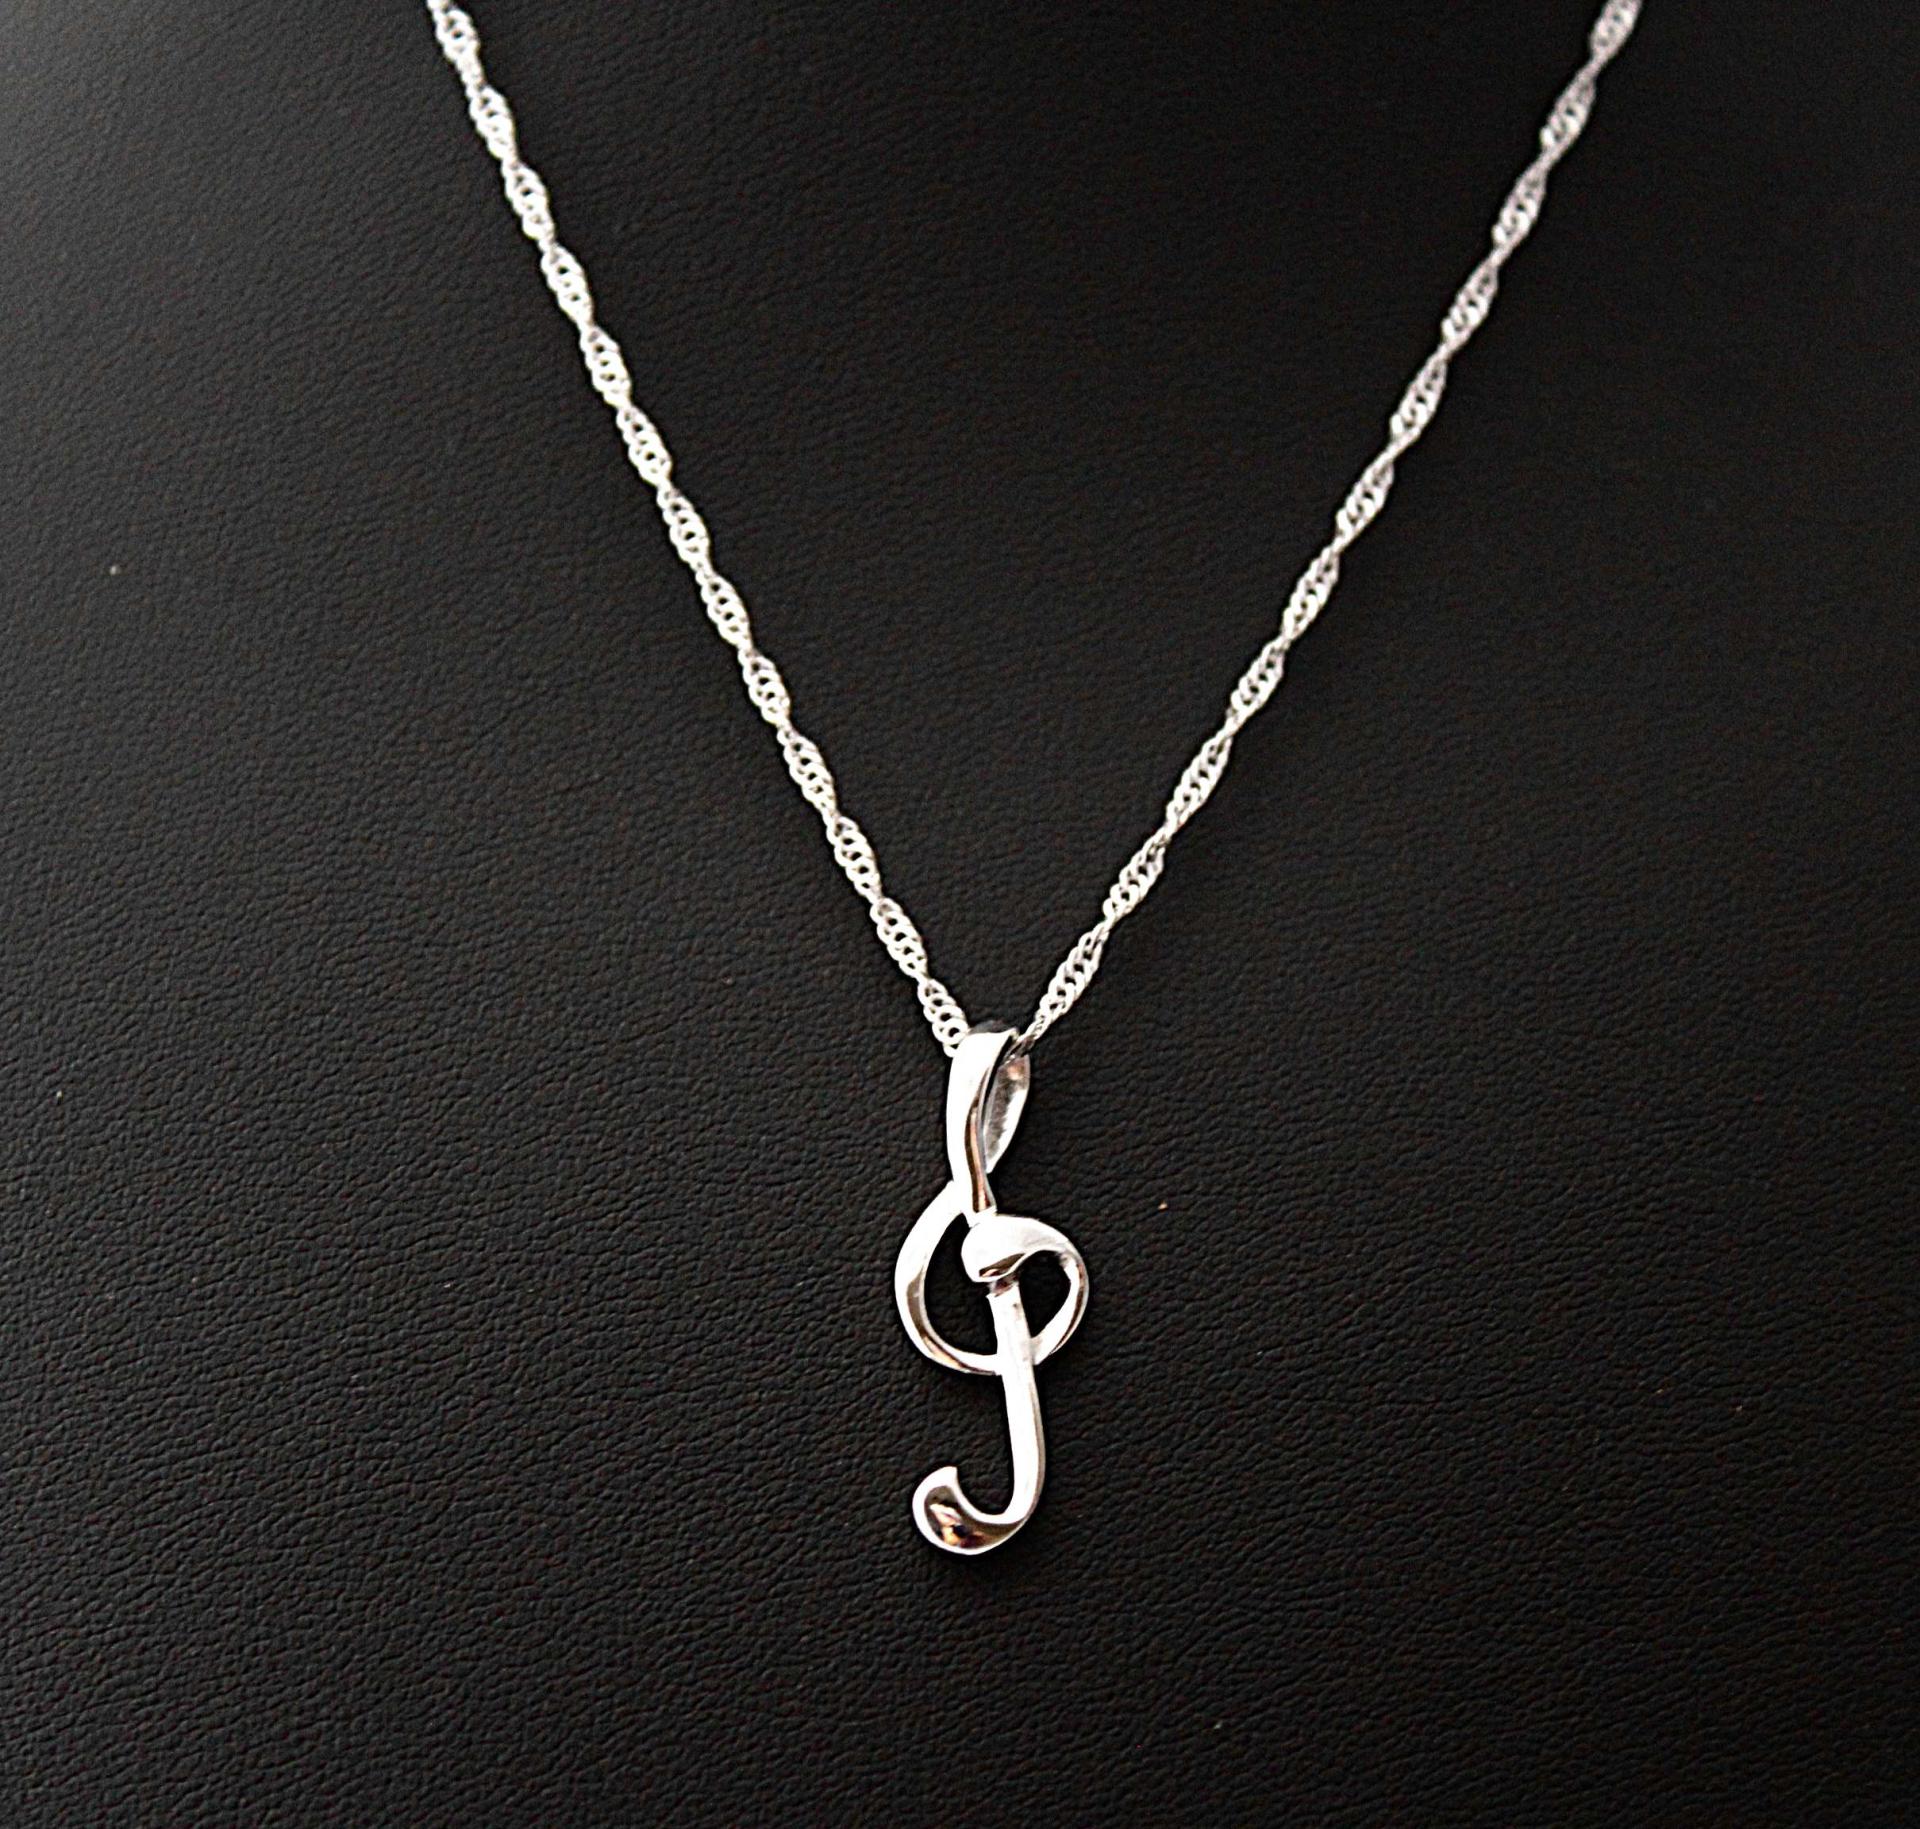 Treble Clef Delicate Necklace in Stainless Steel